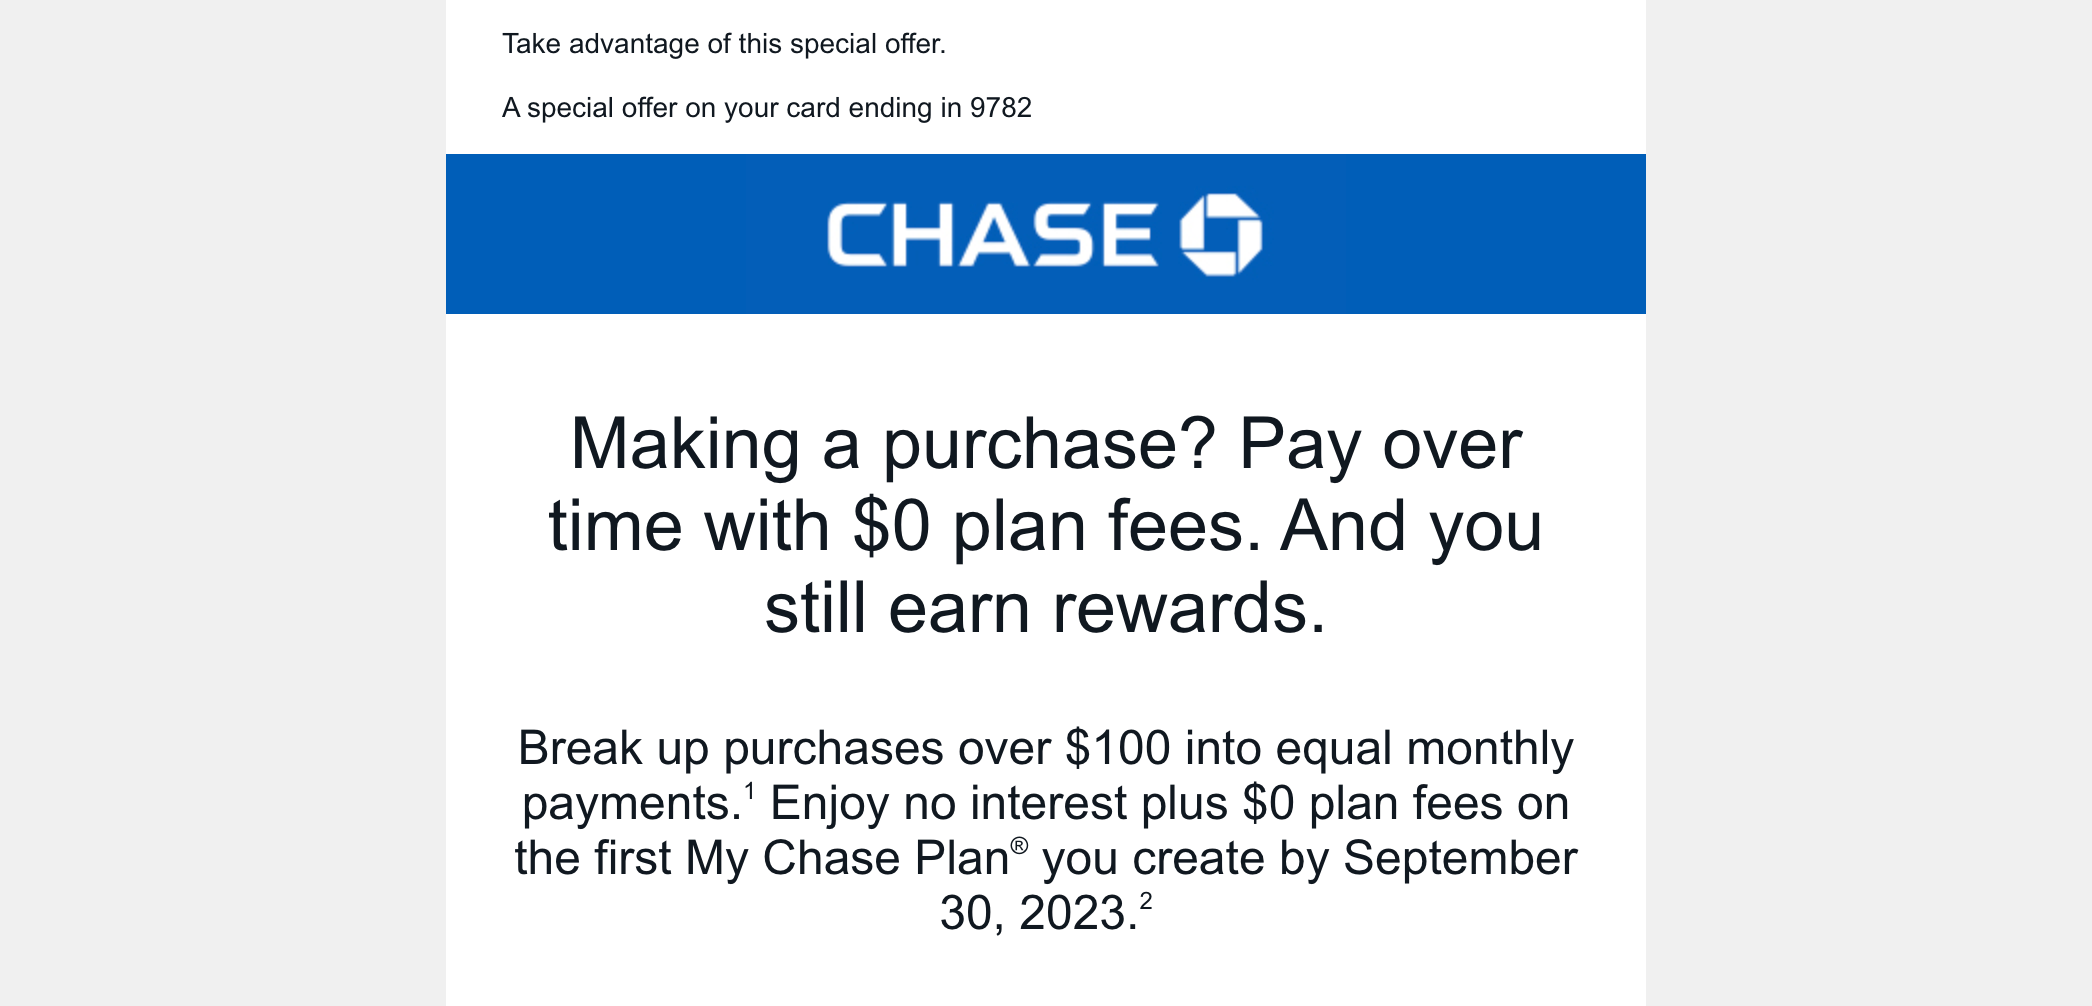 An email with a targeted offer for $0 My Chase Plan